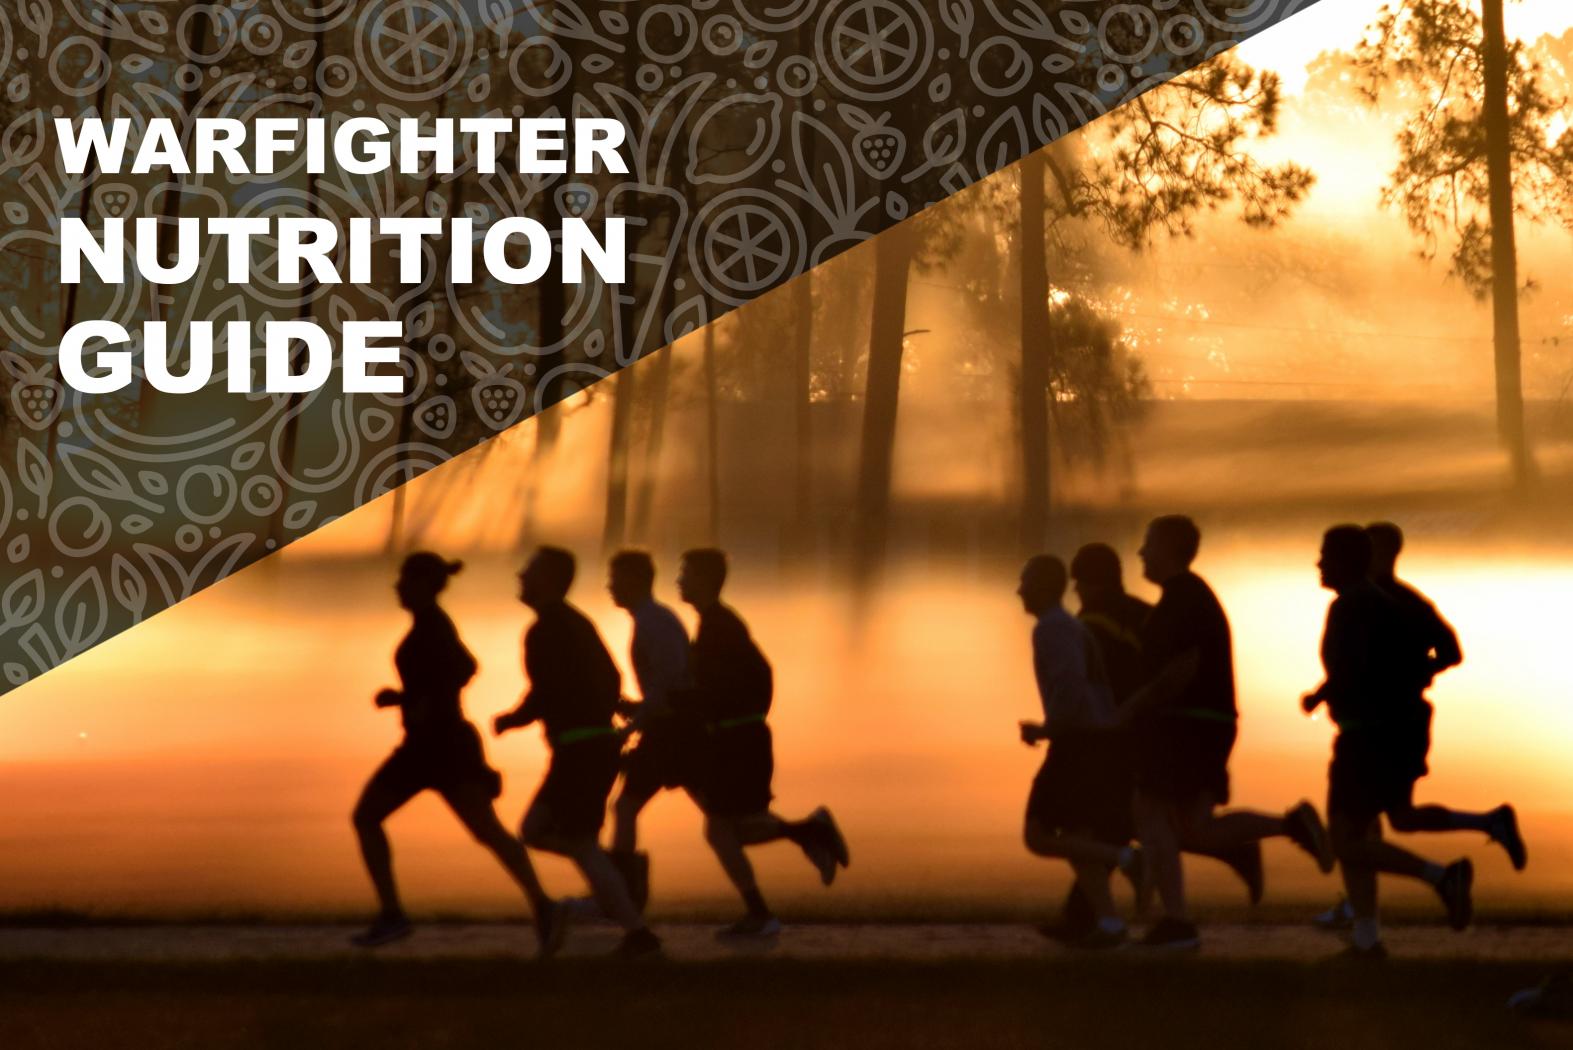 HPRC Warfighter Nutrition Guide. Chapter 11. Silhouette of people running for fitness training at sunrise.